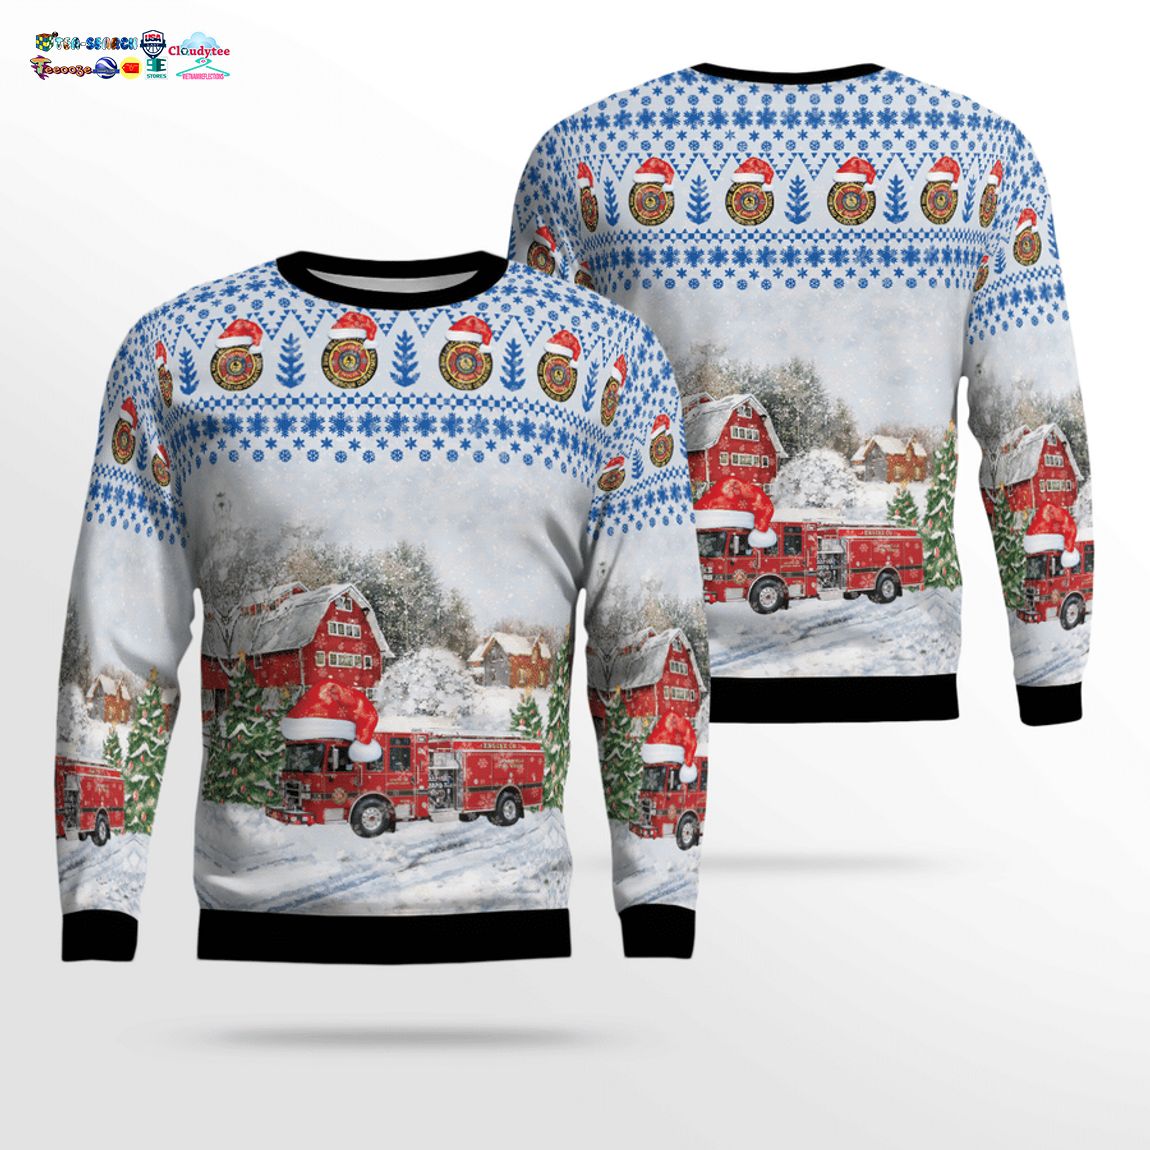 florida-jacksonville-fire-and-rescue-department-ver-1-3d-christmas-sweater-1-WMq5R.jpg